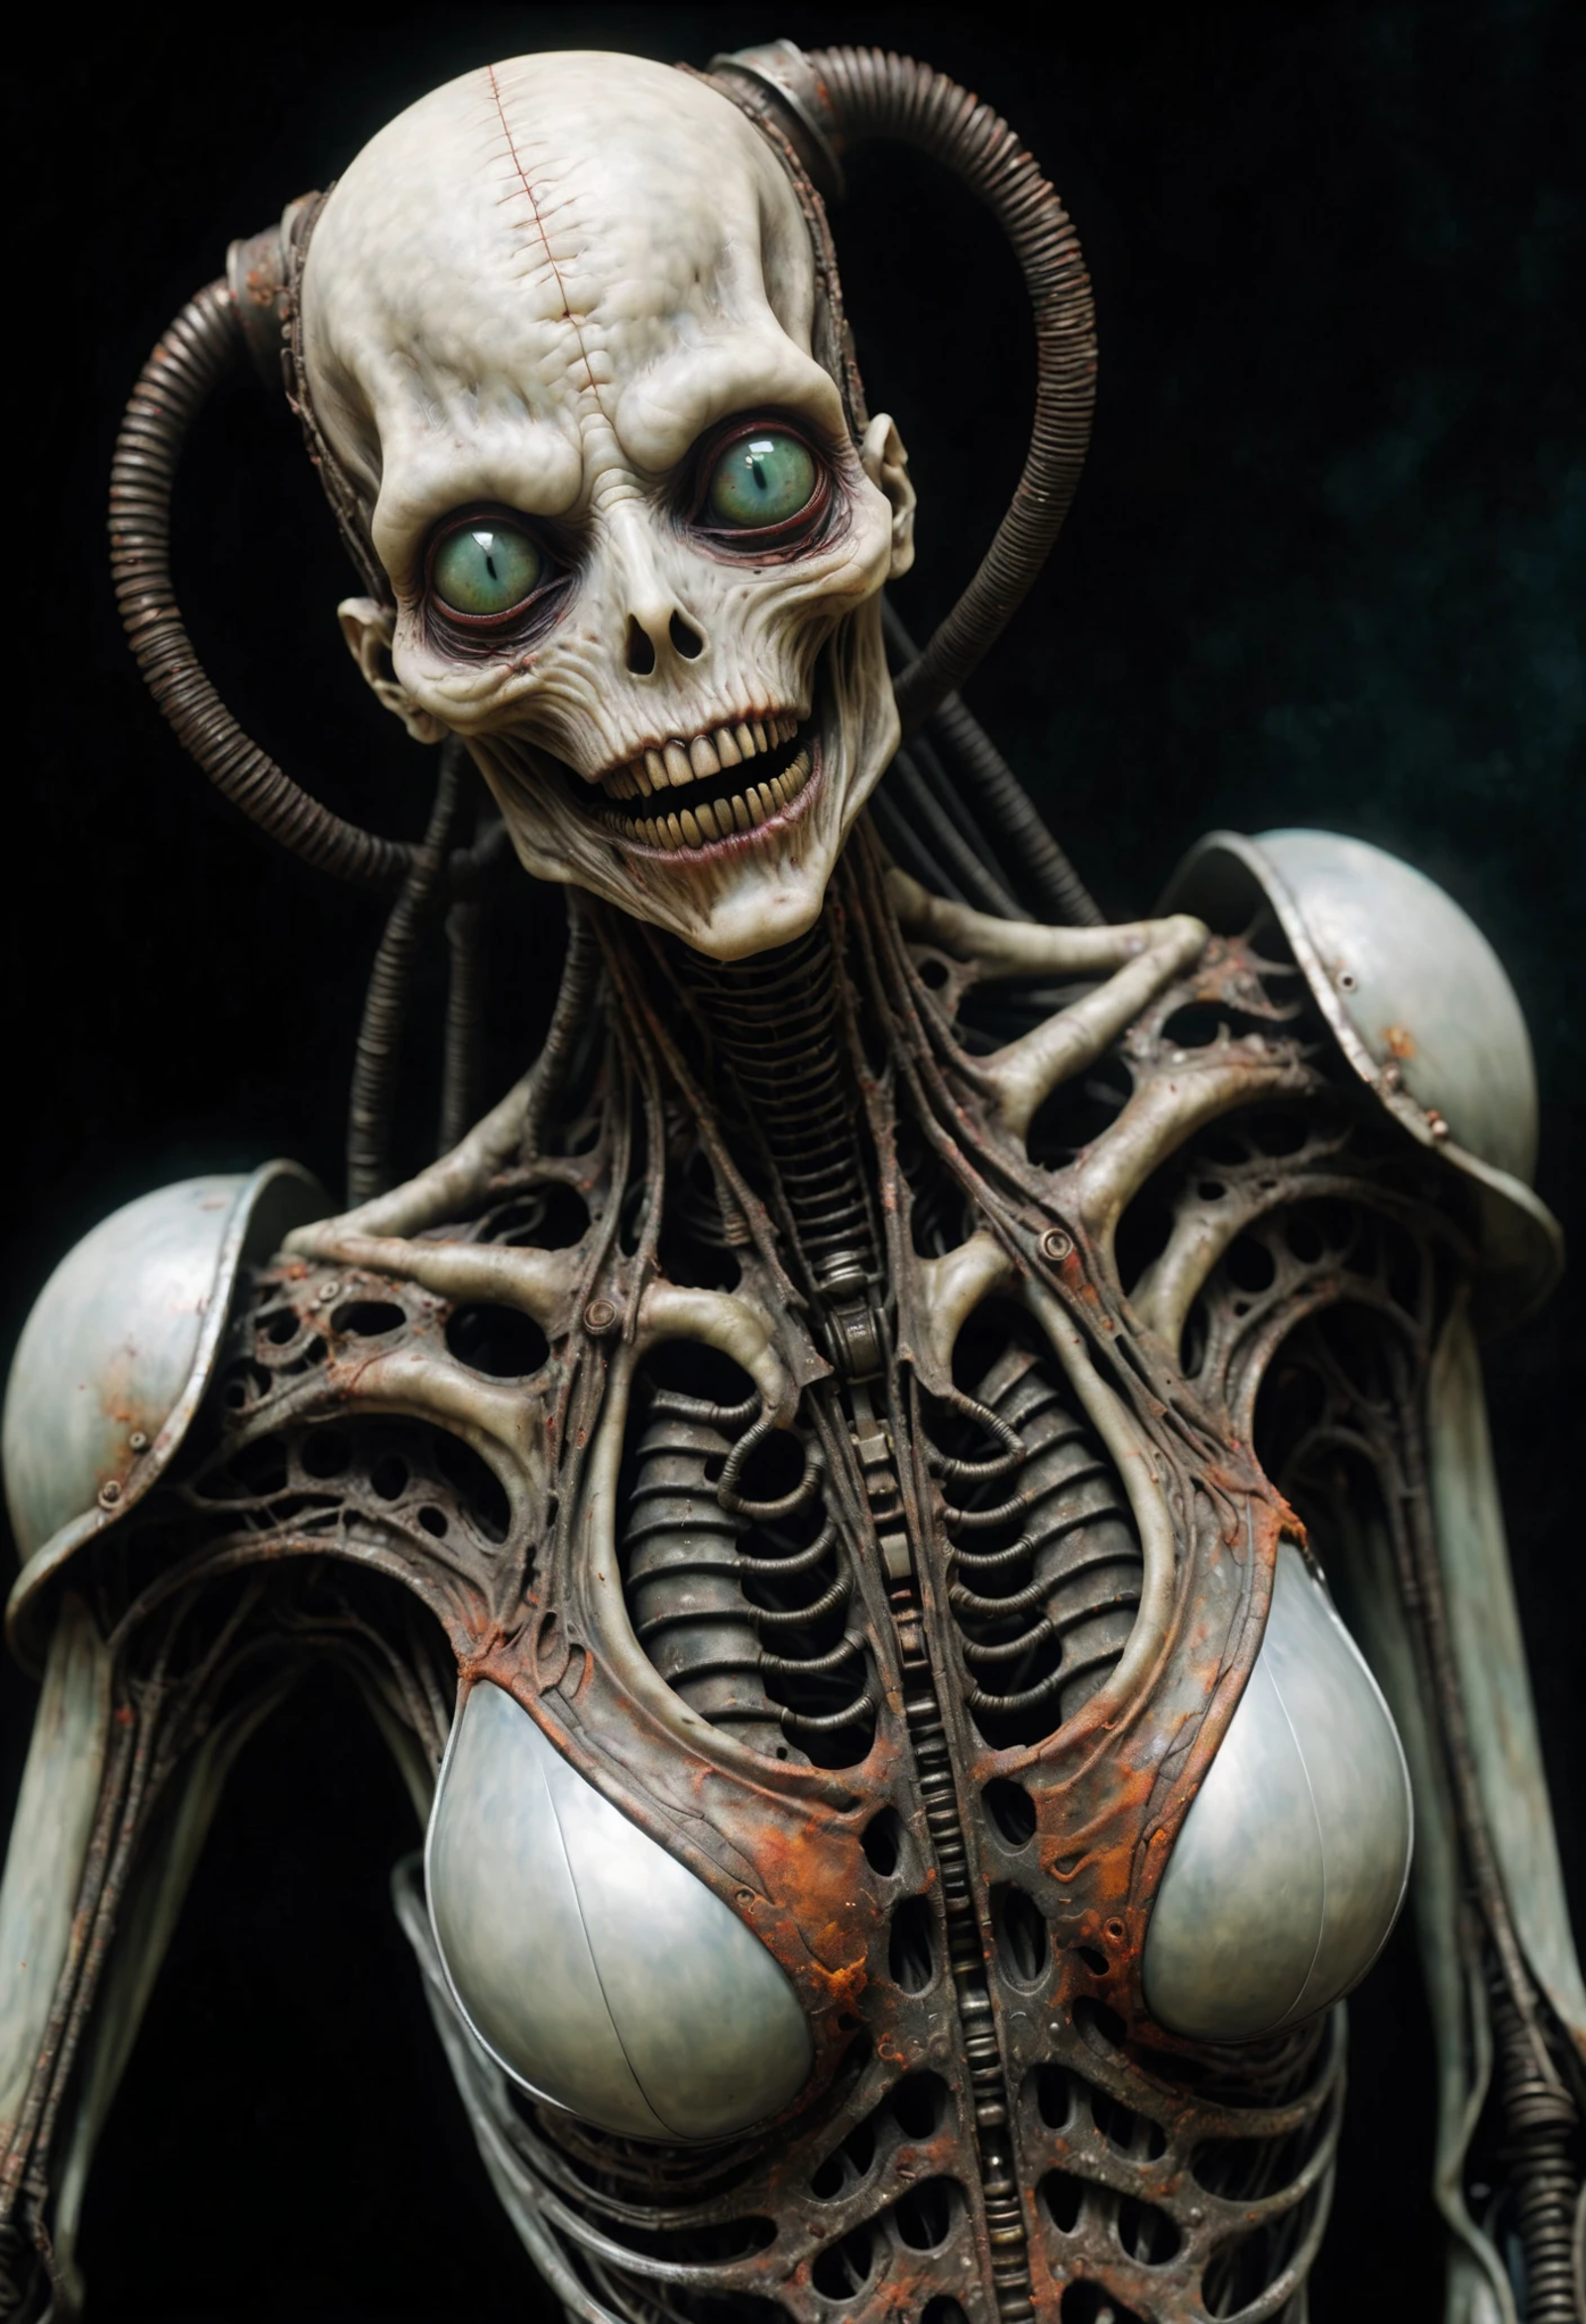 A robot with a skeleton face and green eyes, possibly from a sci-fi movie.